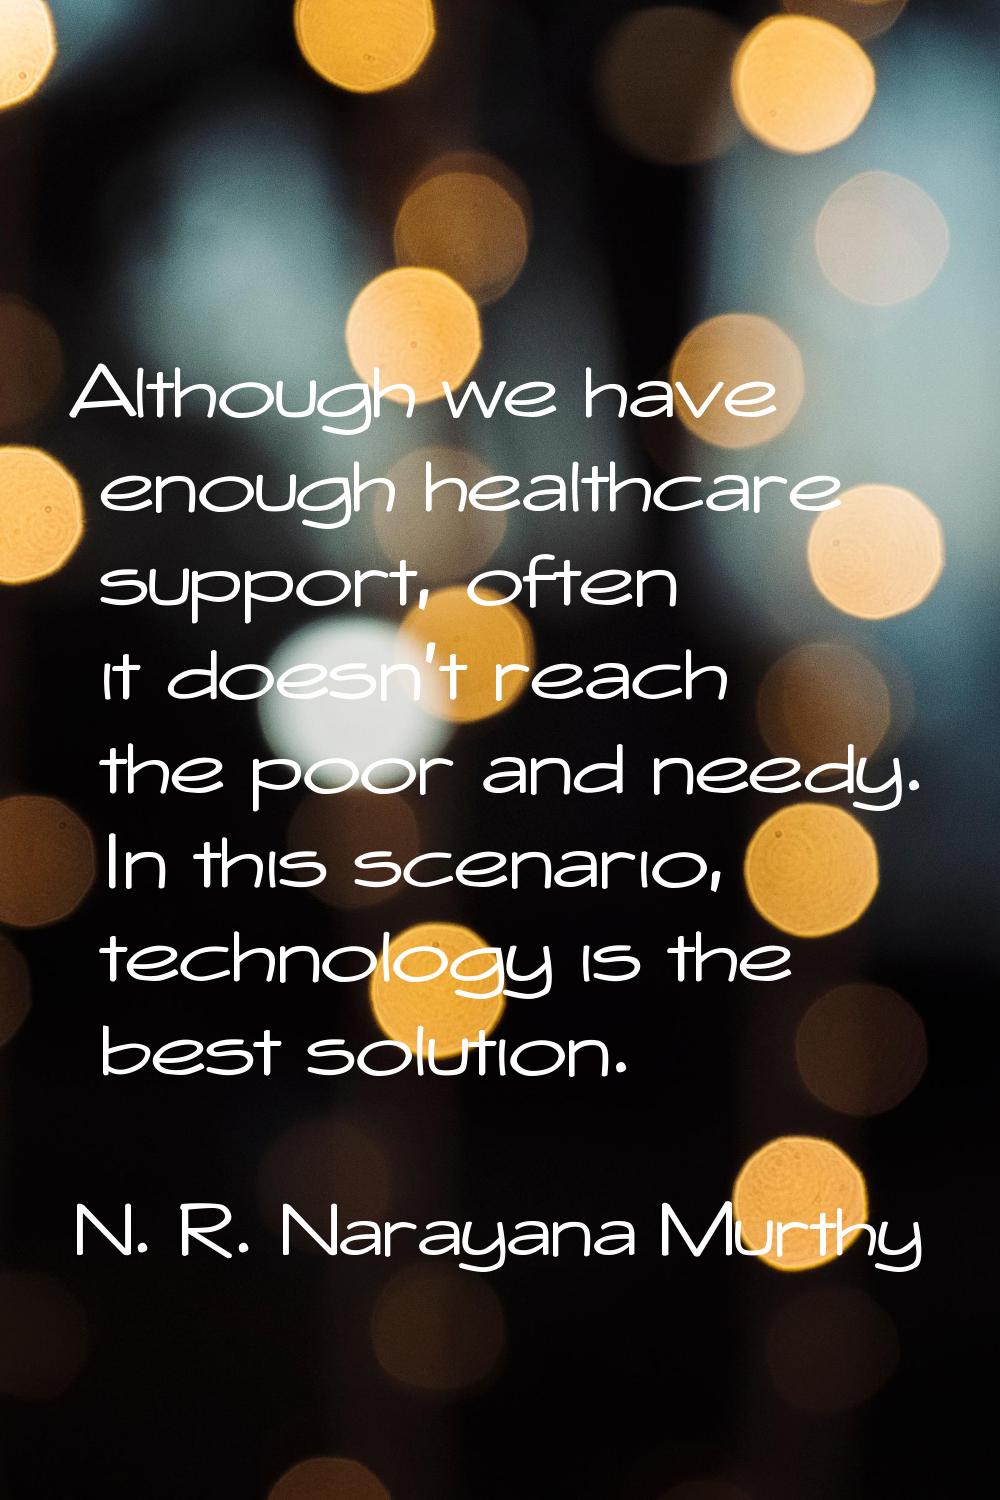 Although we have enough healthcare support, often it doesn't reach the poor and needy. In this scen